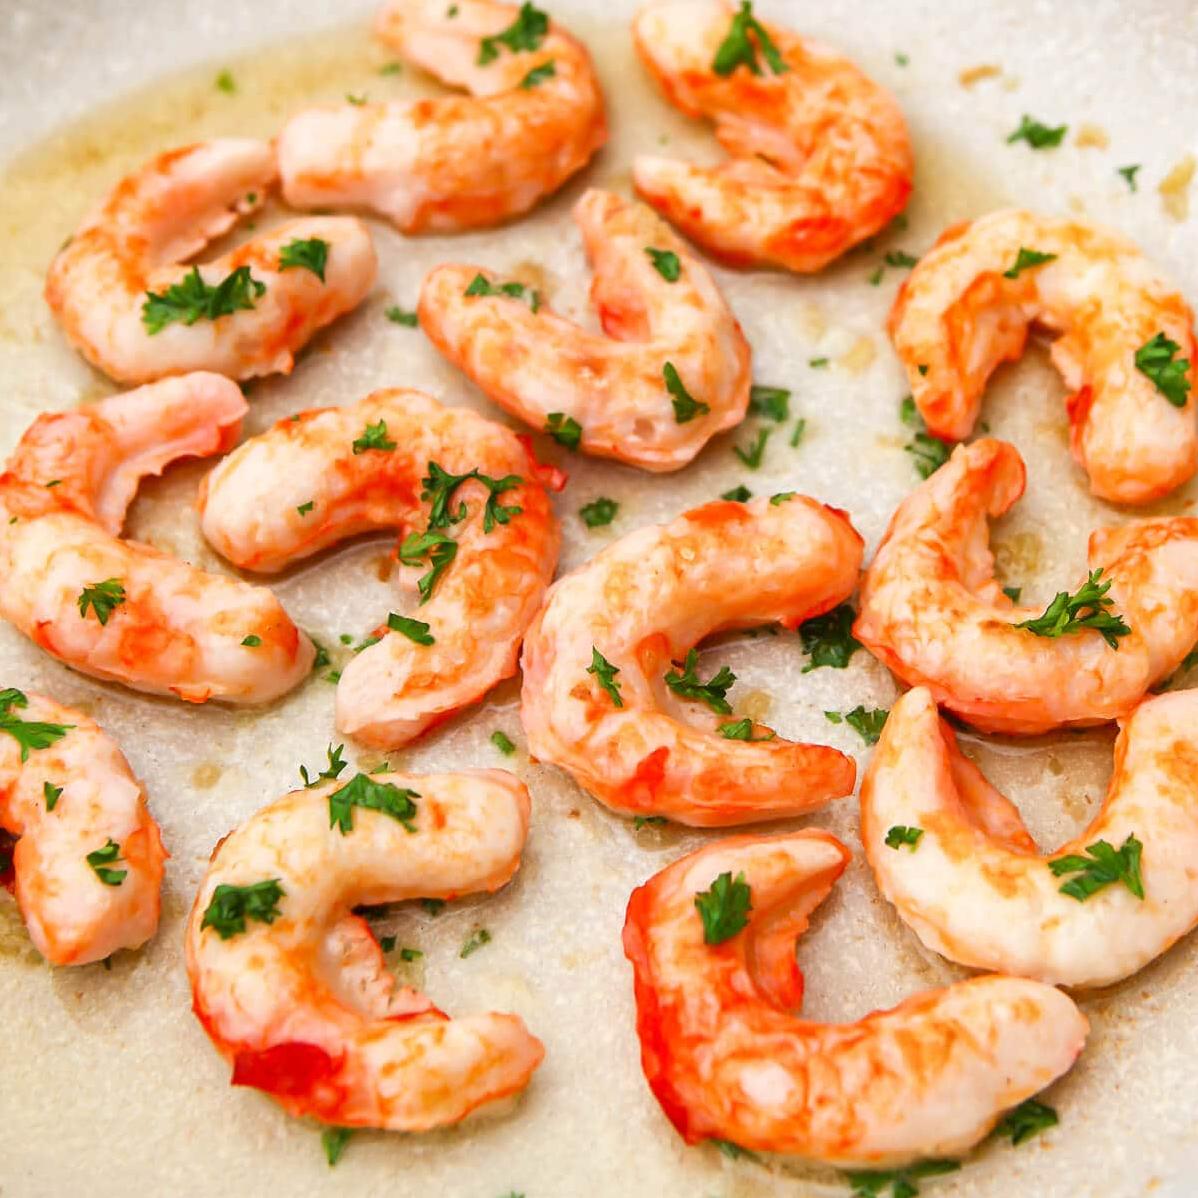  From the sea to the plate, this vegan shrimp dish is sure to impress.